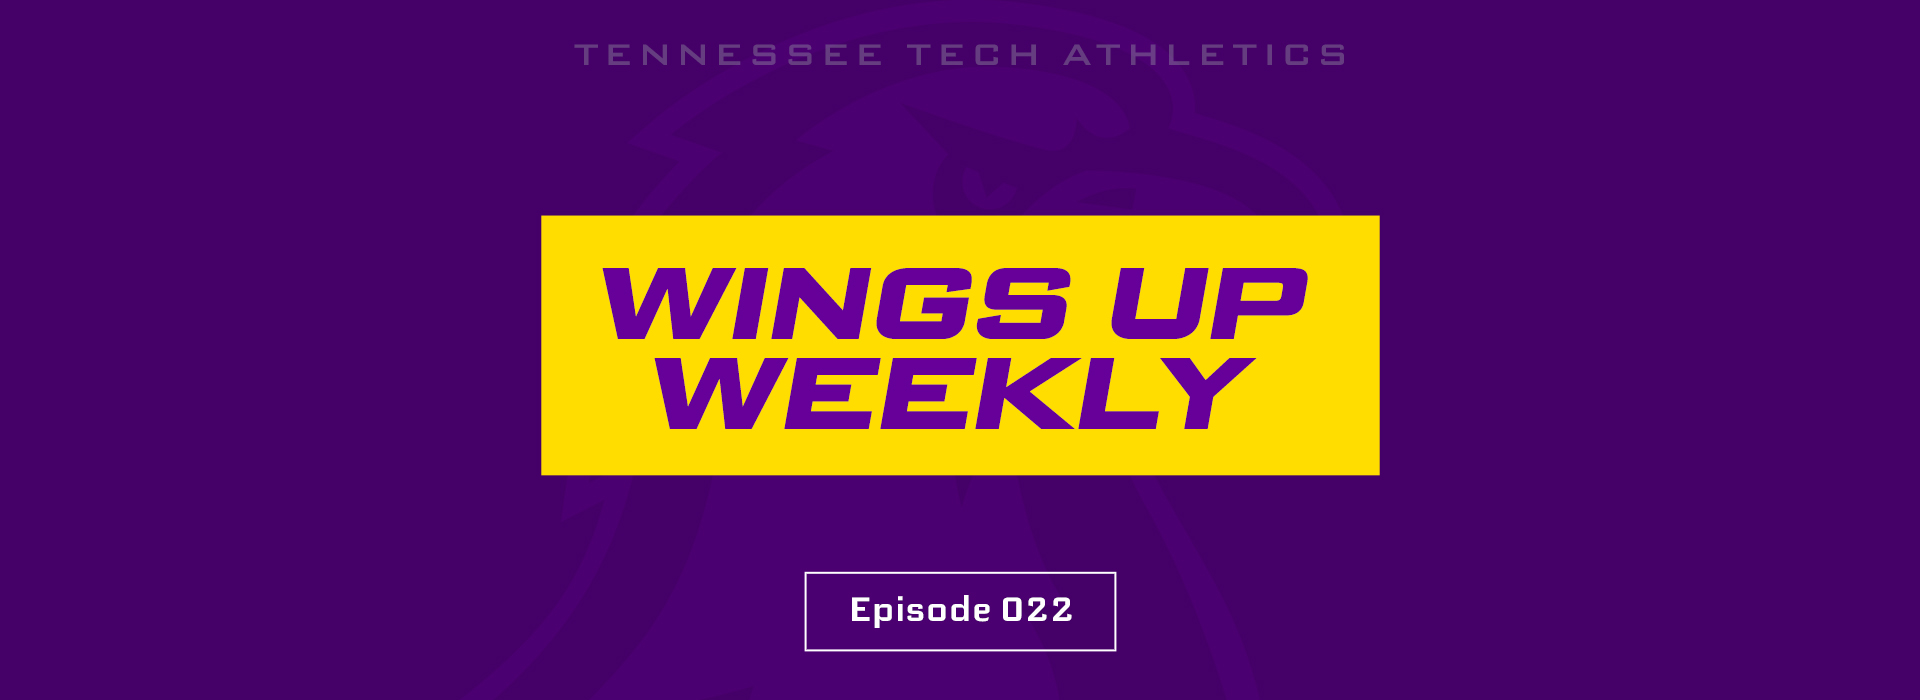 Wings Up Weekly: Episode 022 - featuring Tech assistant tennis coach Edu Mena